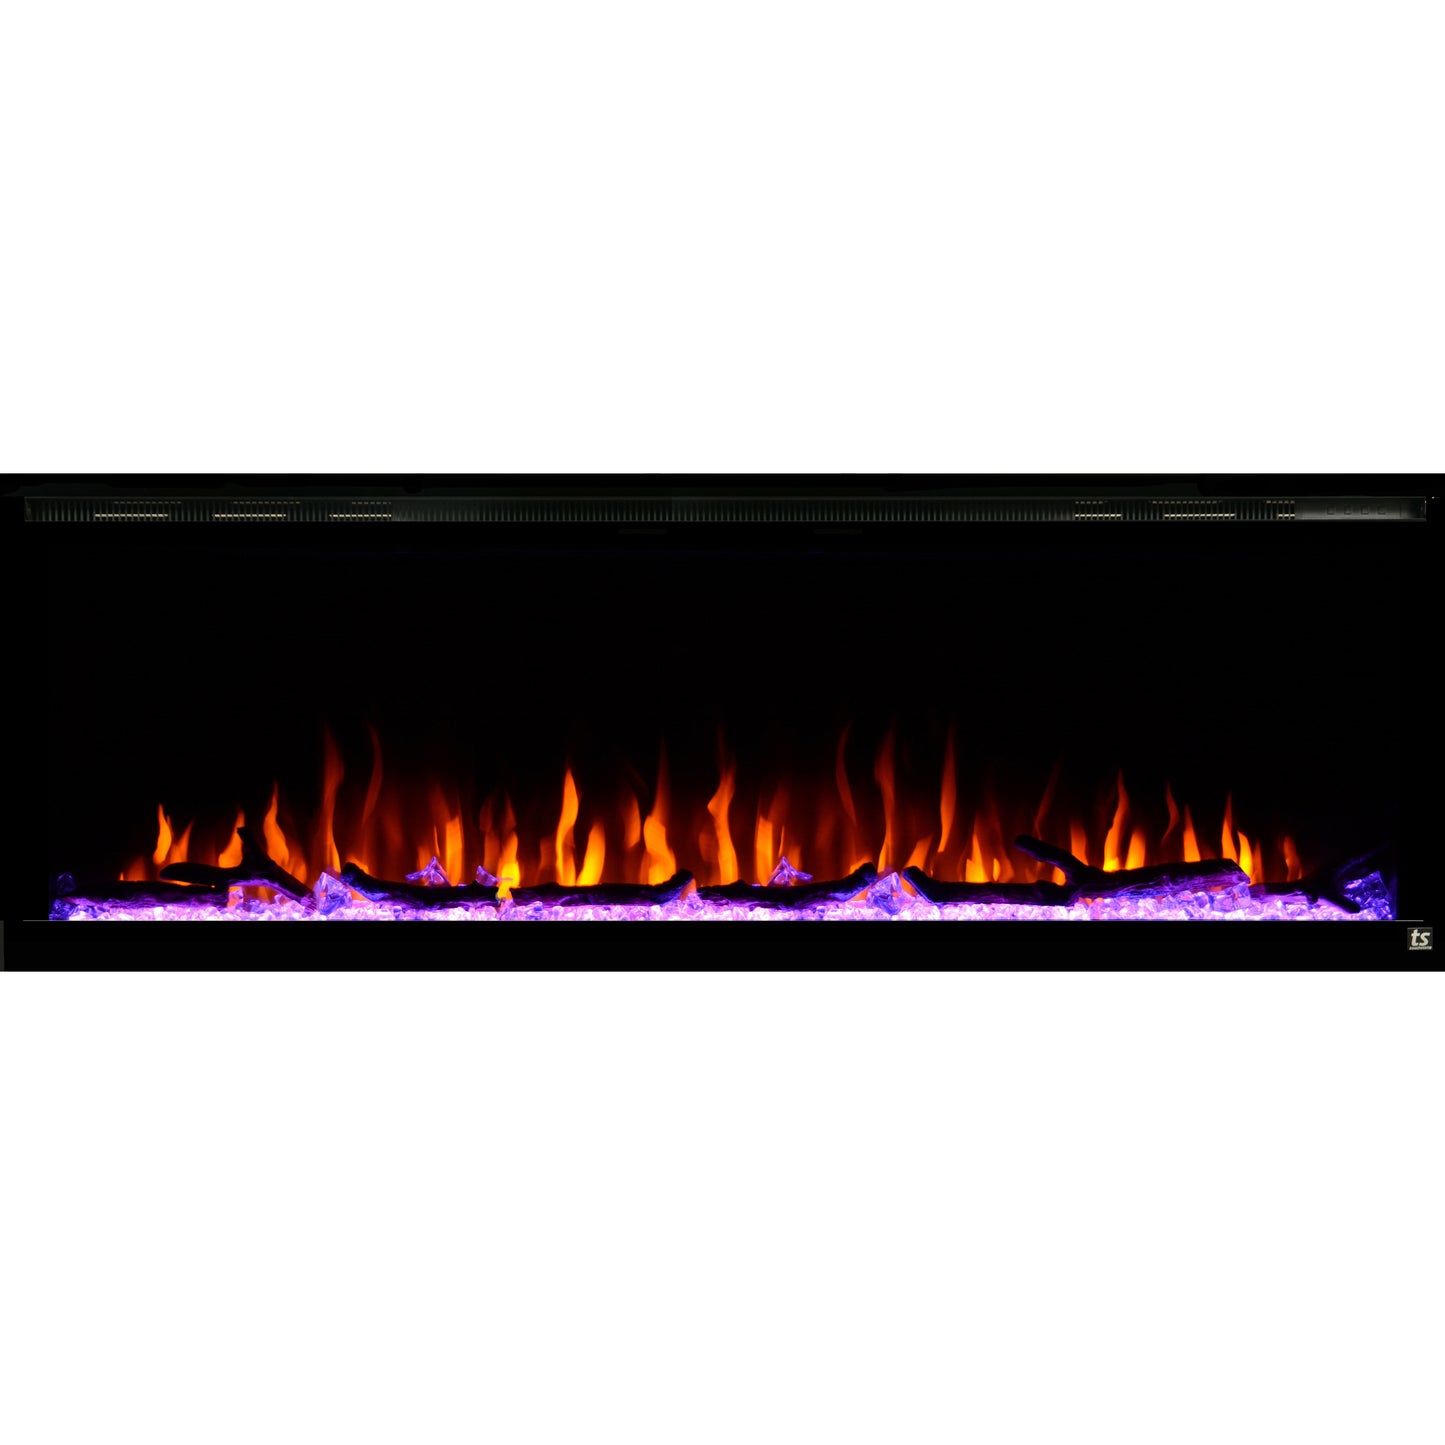 Black Touchstone Sideline Elite Recessed Electric Fireplace in combination of yellow, red, orange flame with purple crystals.